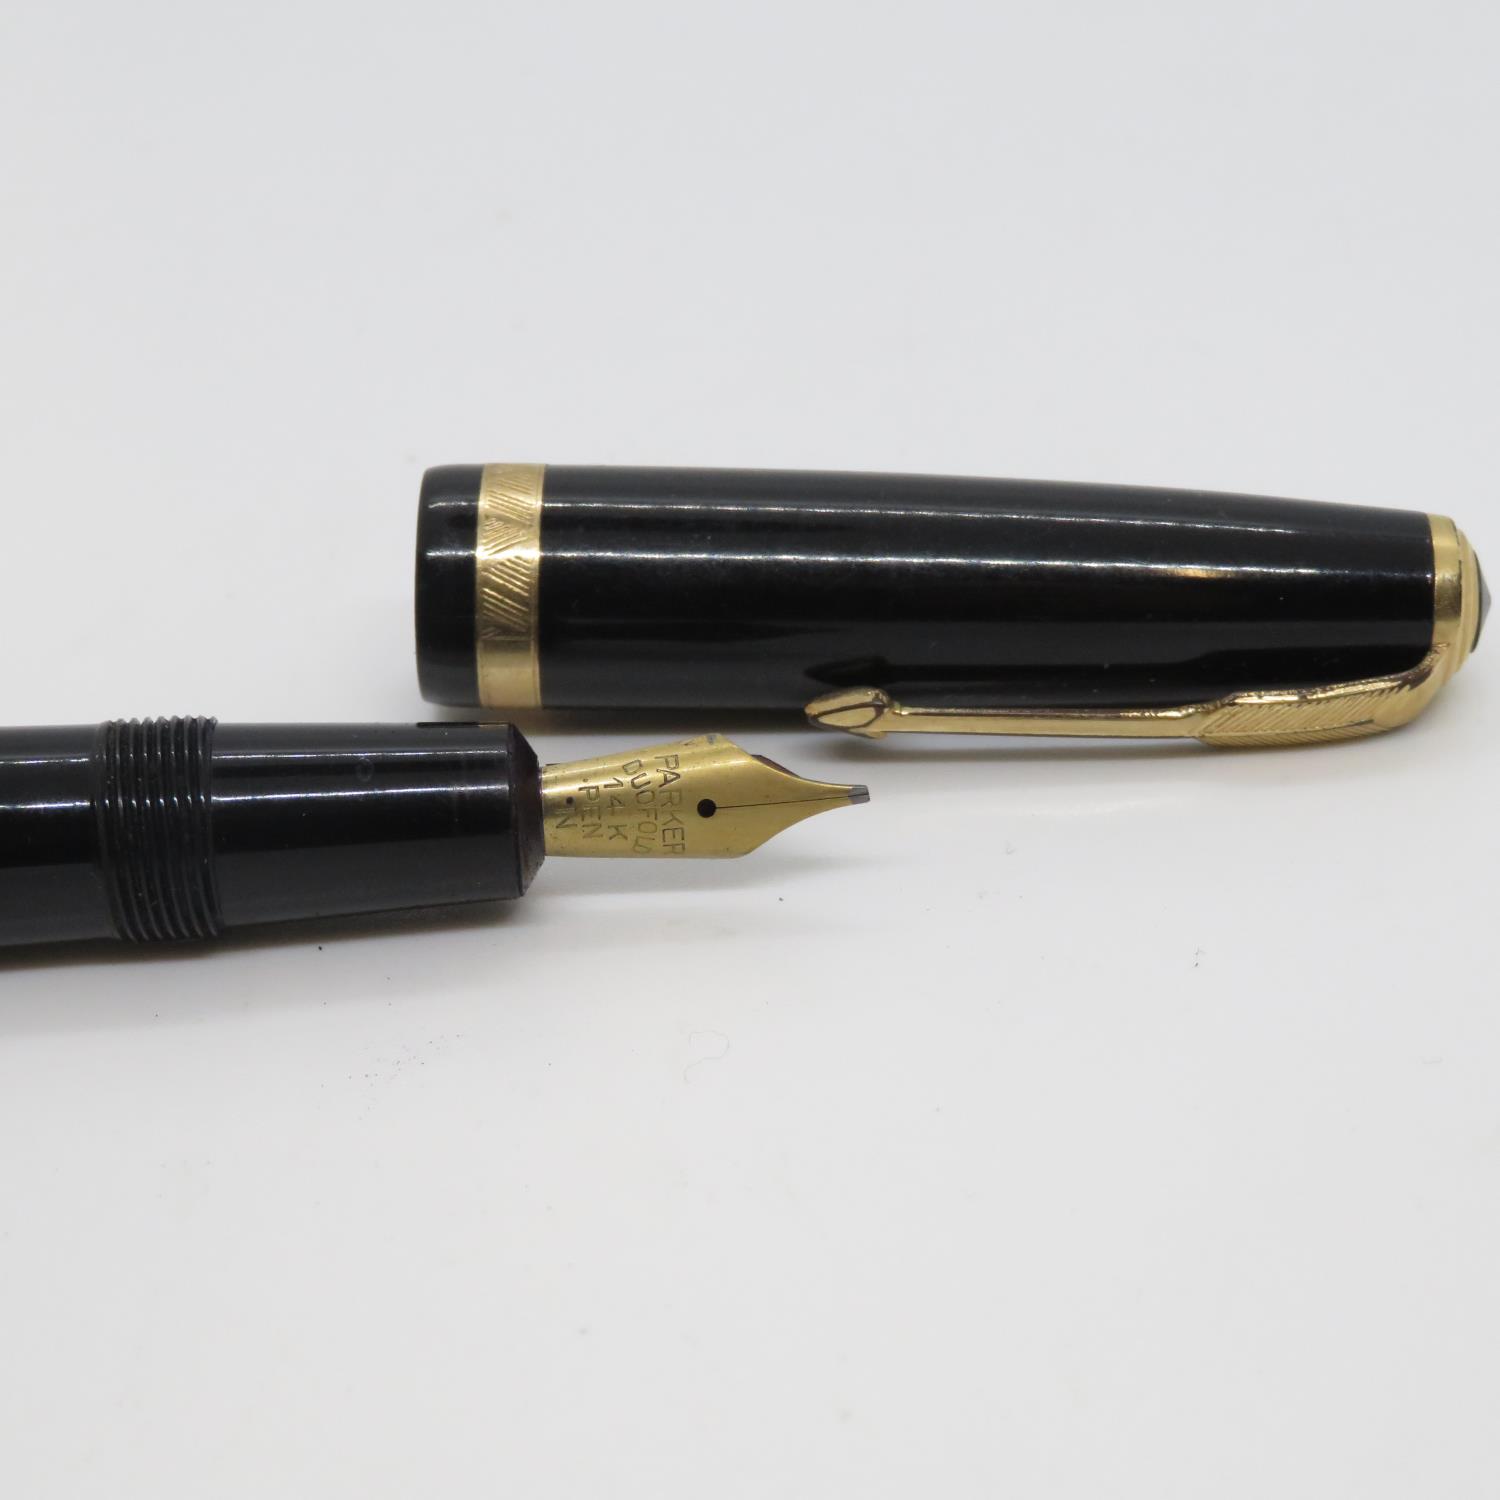 Parker duofold 14ct fountain pen - Image 2 of 3